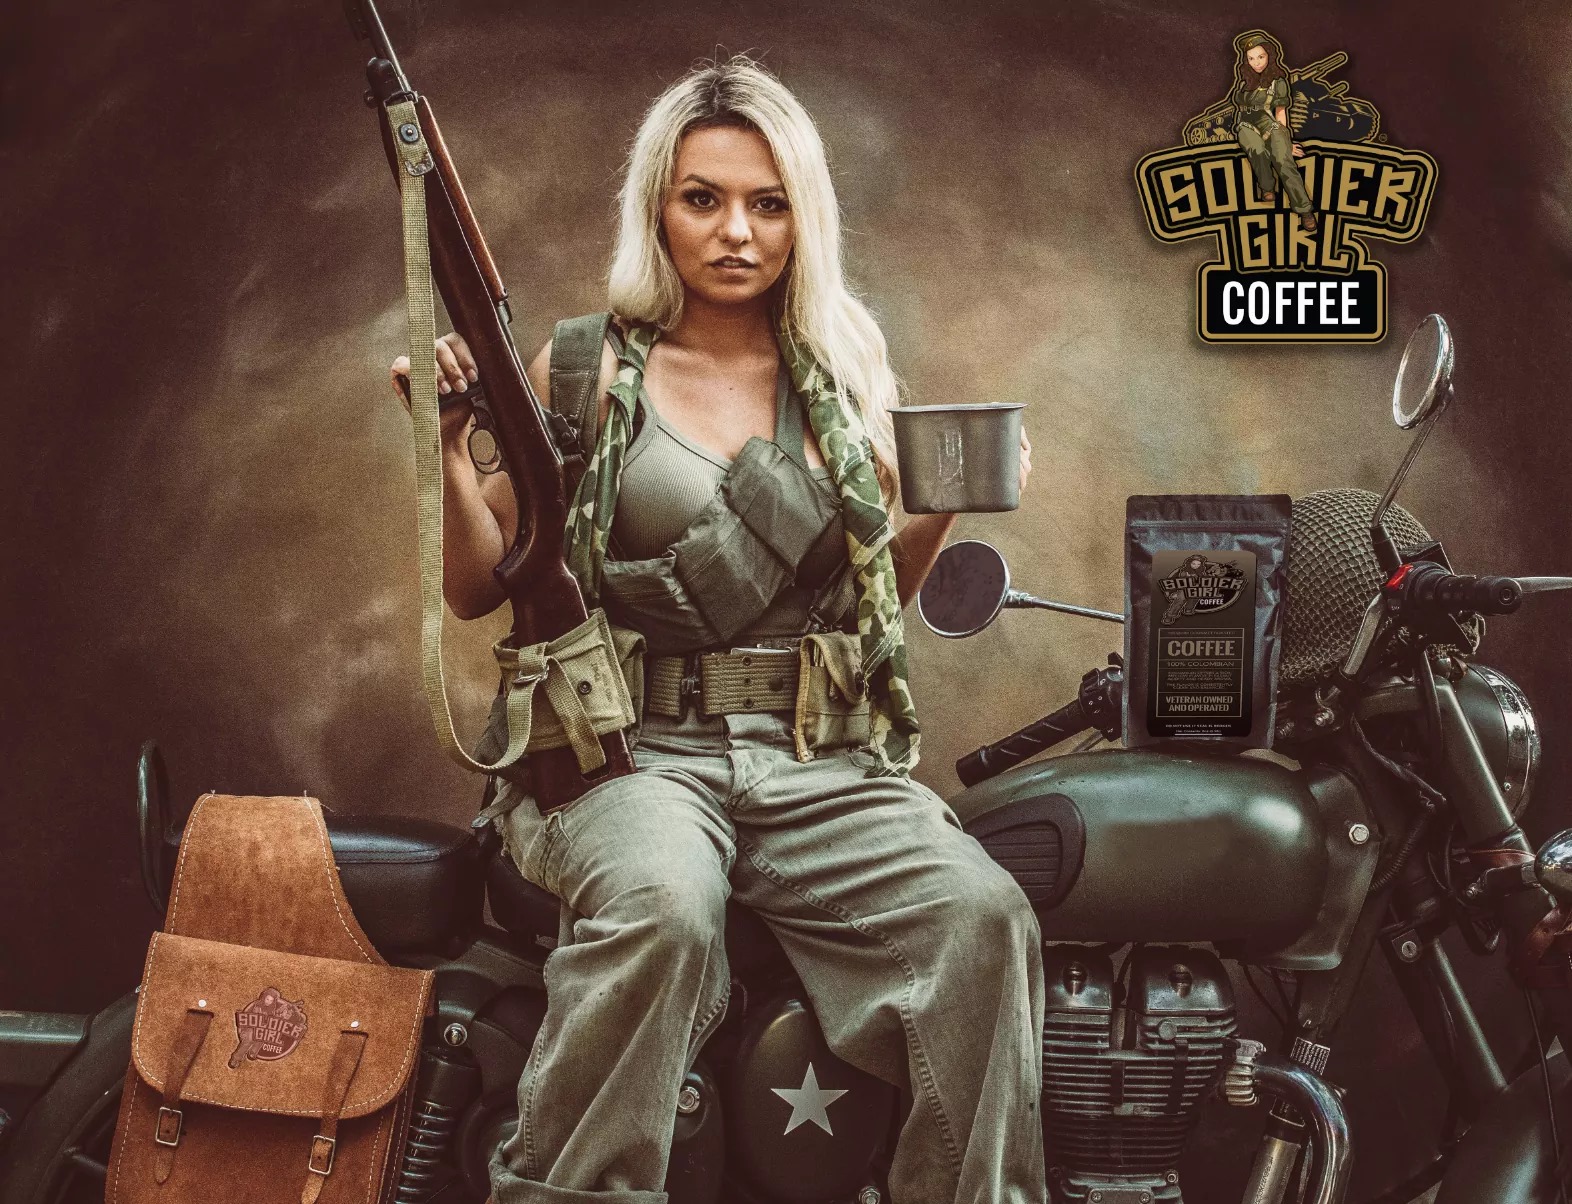 Soldier Girl Coffee